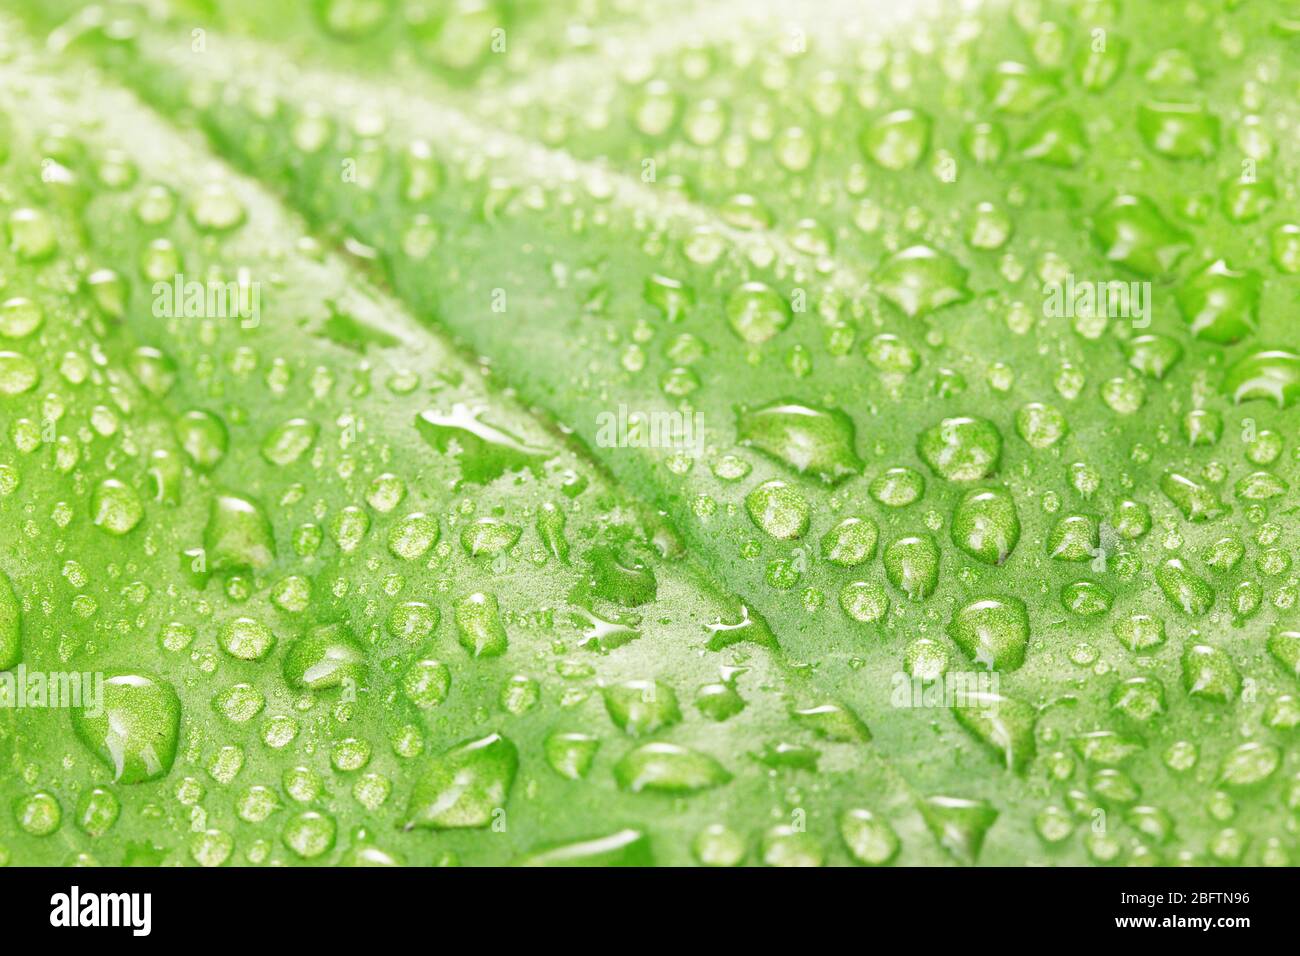 plantain leaf with drops close up Stock Photo